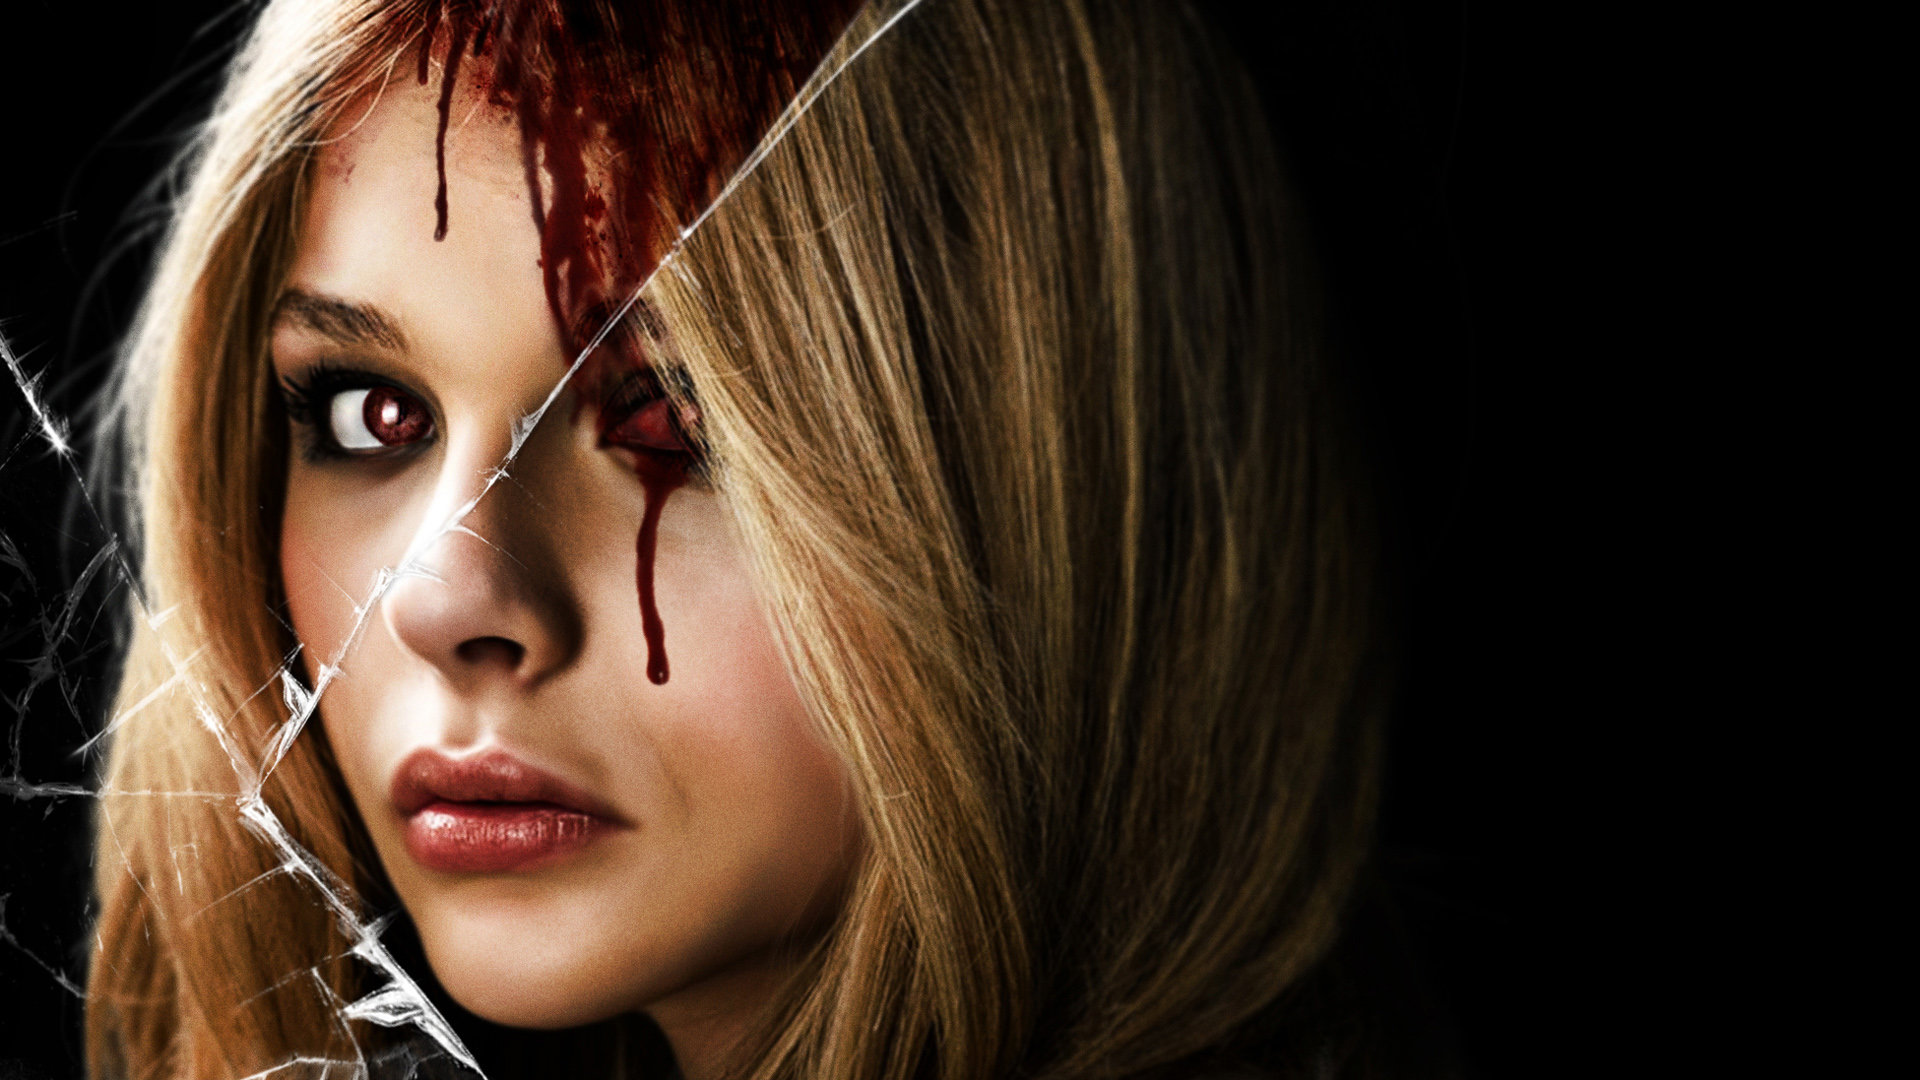 Best Carrie (2013) wallpaper ID:334657 for High Resolution hd 1920x1080 PC